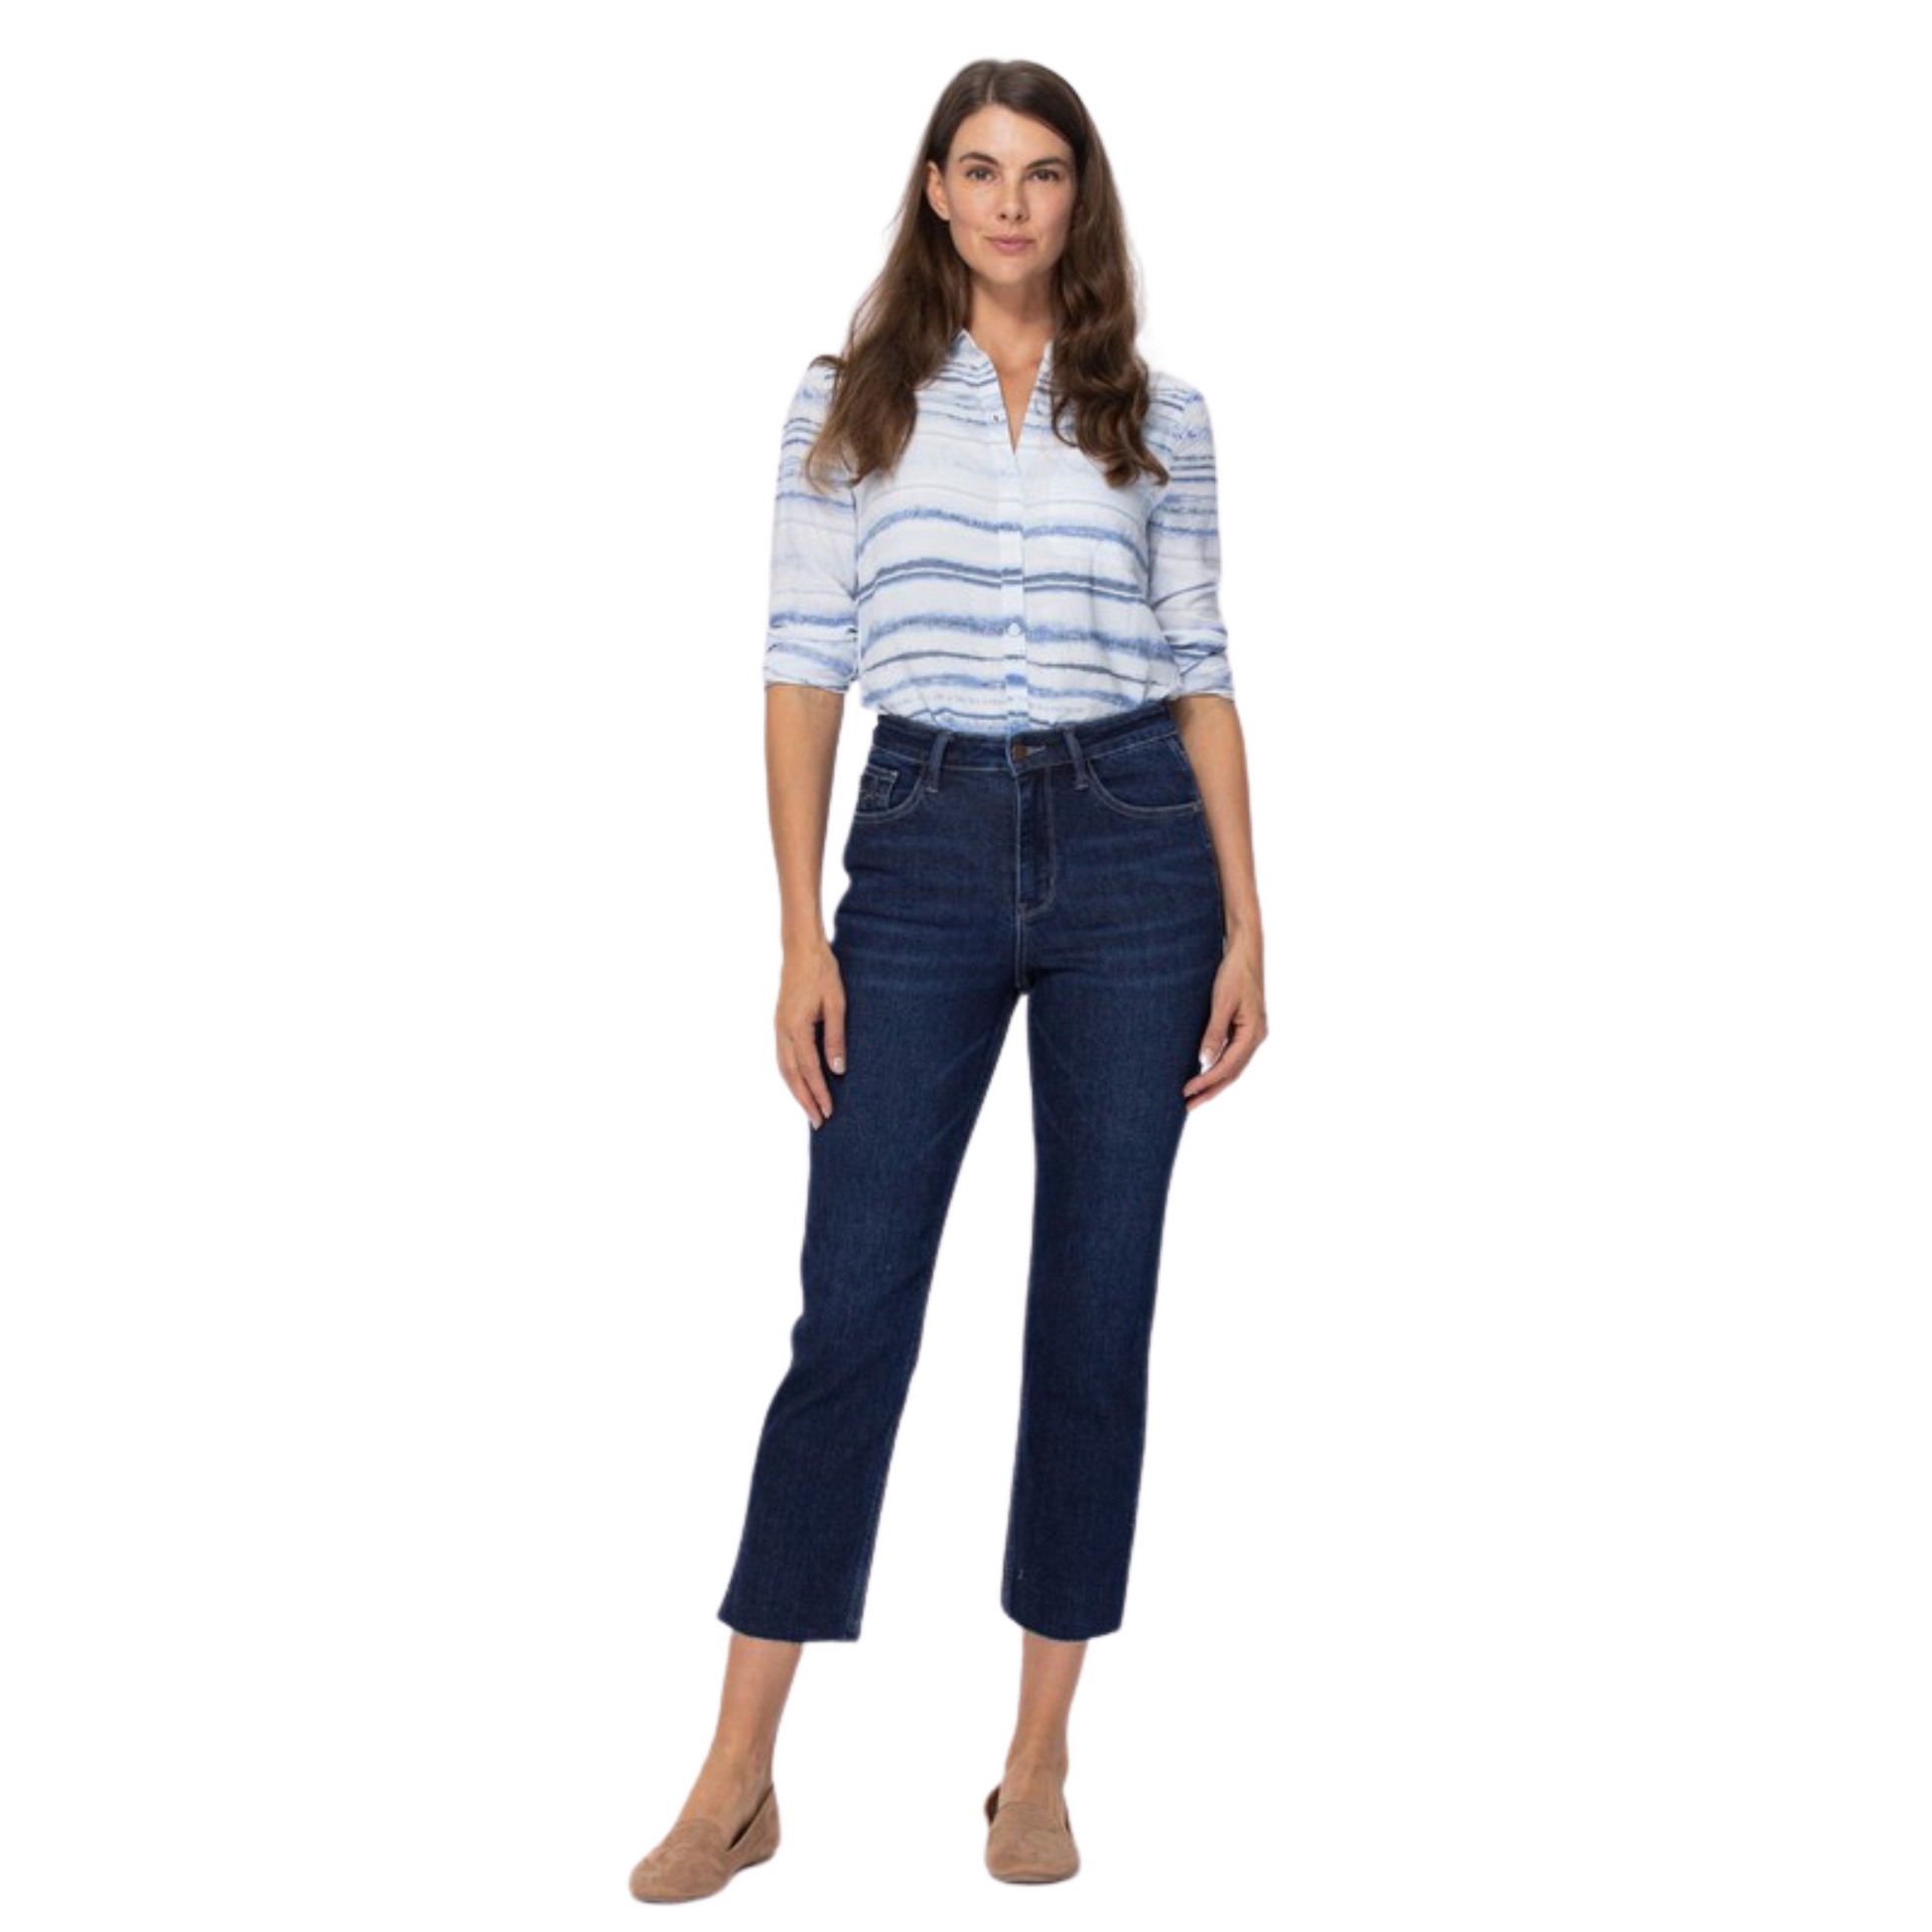 These high waisted cropped jeans offer a classic look with a dark wash and straight leg style. The cropped length ensures all-day comfort, no matter where you are. Enjoy the perfect mix of style and comfort with this timeless piece.